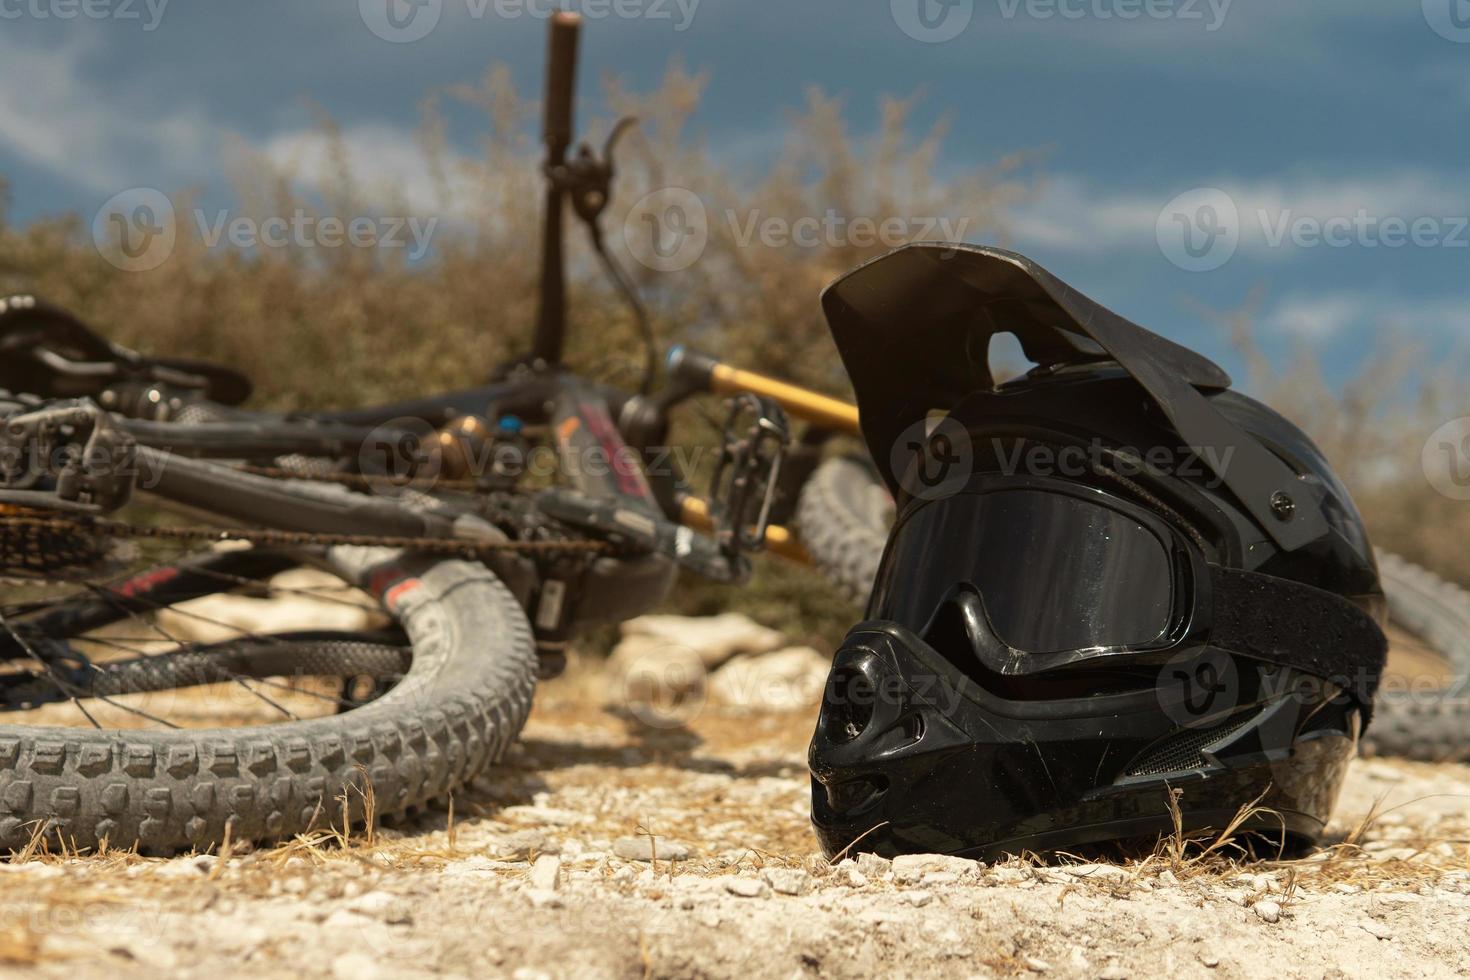 MTB bike and helmet with a protective goggles for downhill cycling photo